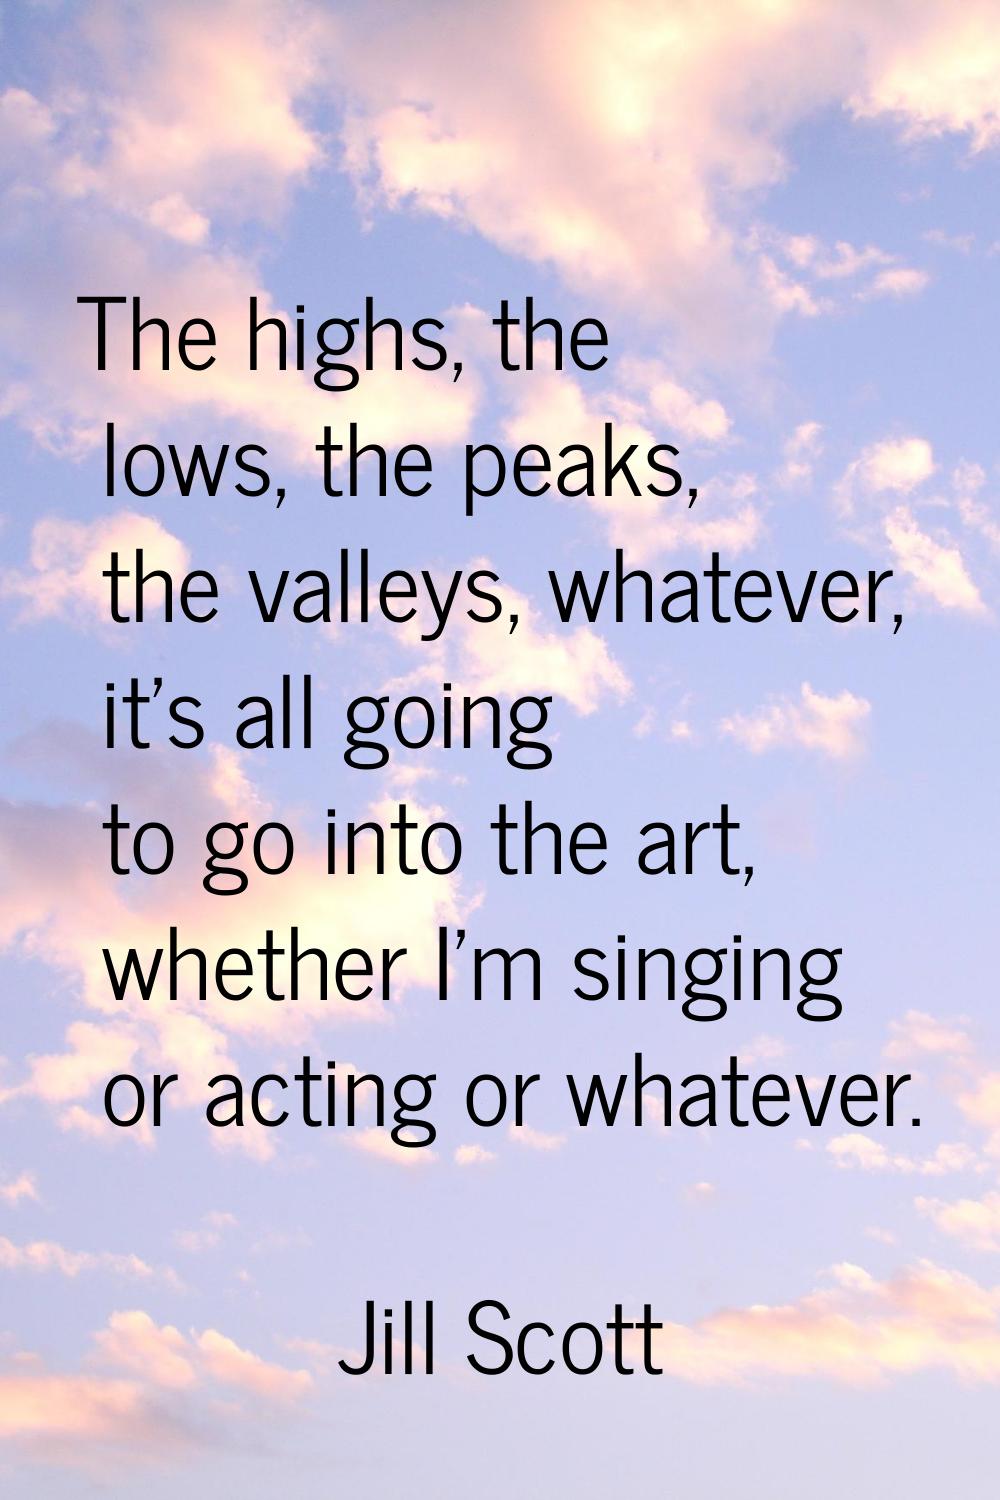 The highs, the lows, the peaks, the valleys, whatever, it's all going to go into the art, whether I